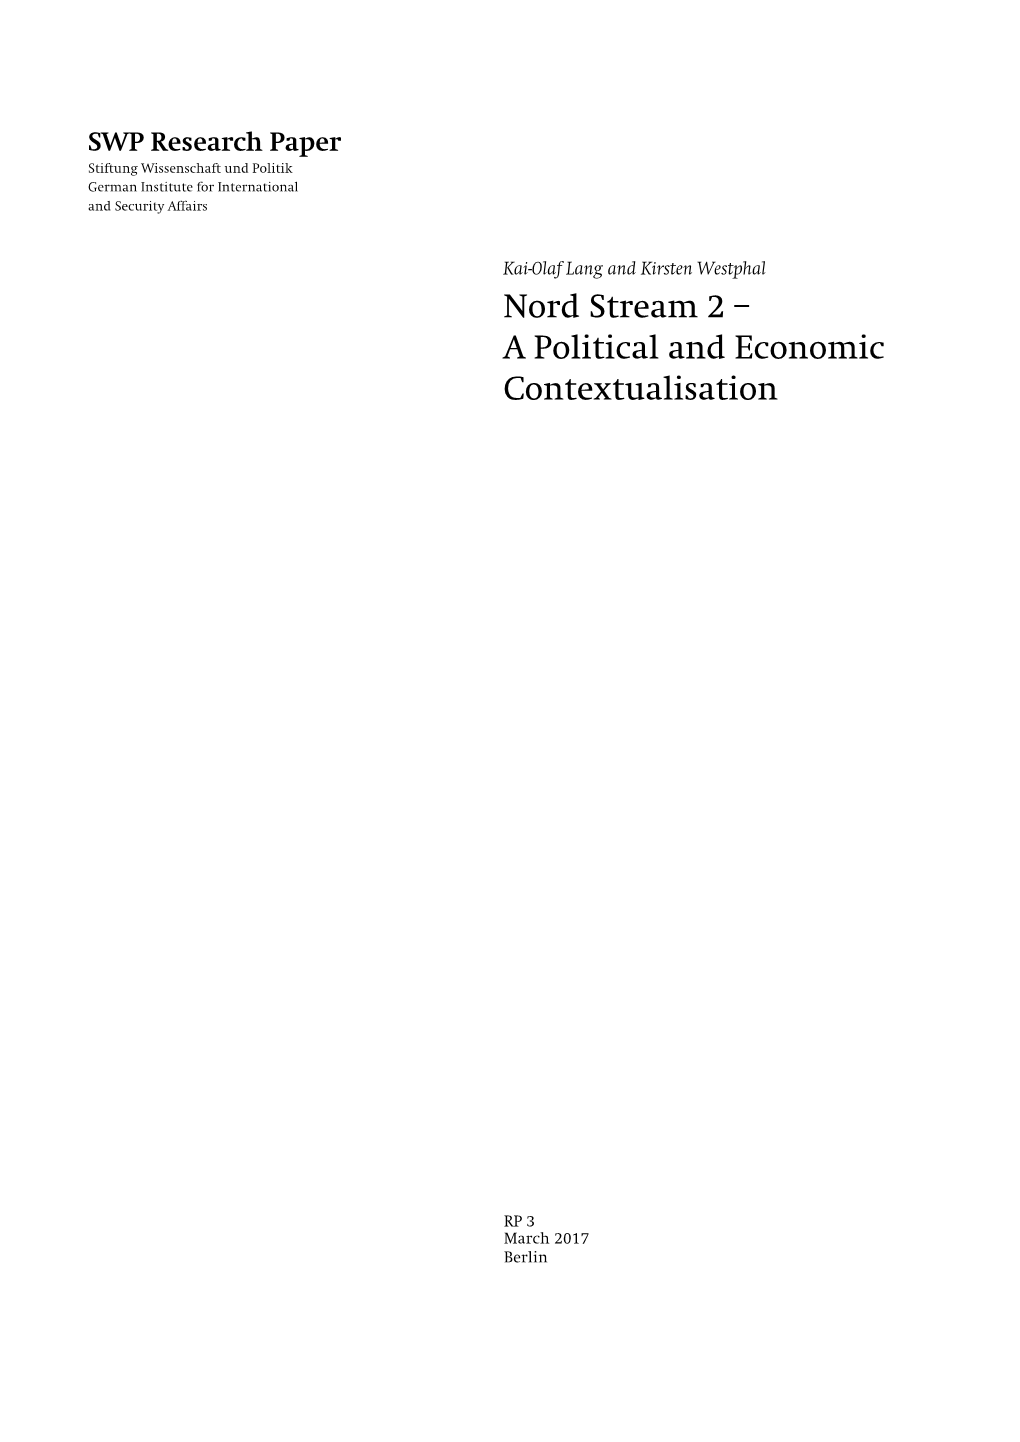 Nord Stream 2 – a Political and Economic Contextualisation